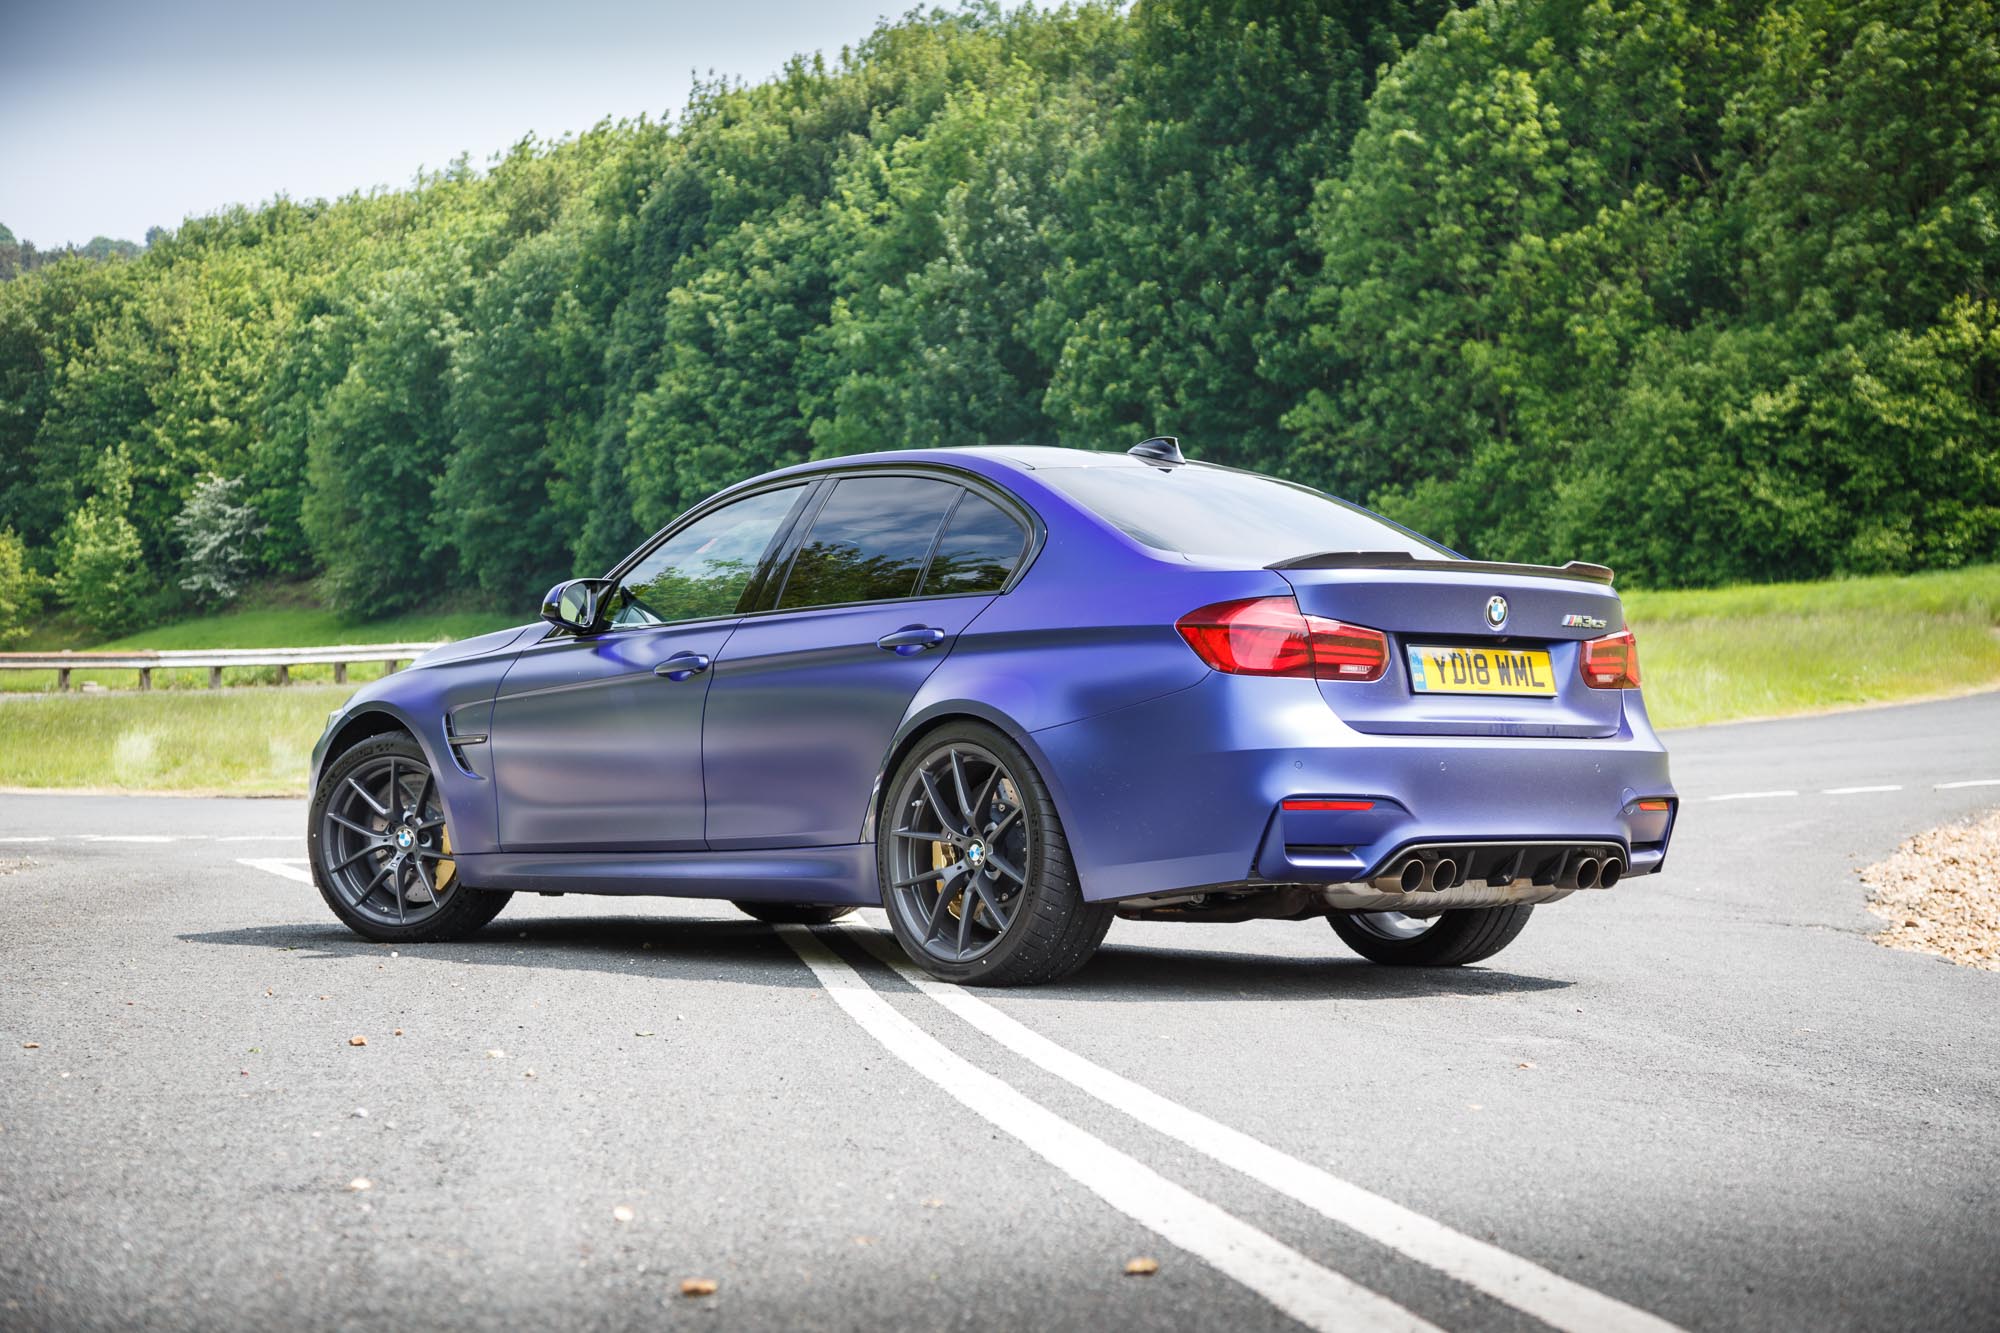 2018 BMW M3 CS Review - The Hardcore F80 M3 To Have? 